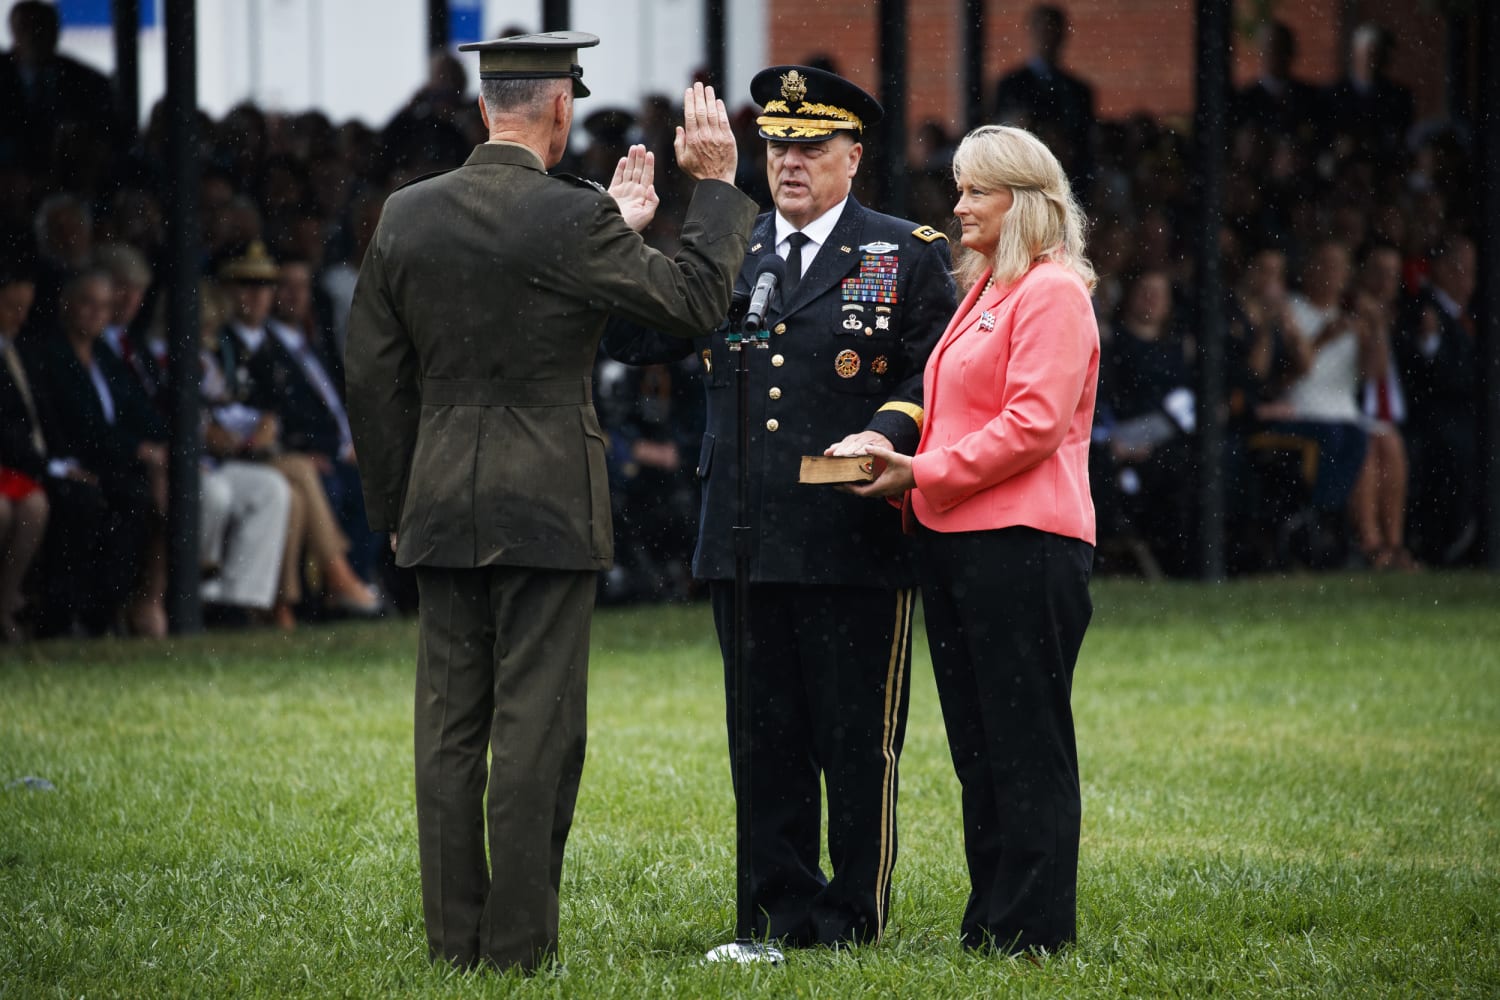 Gen Milley S Wife Saved Vet Who Collapsed At Veterans Day Ceremony In Arlington